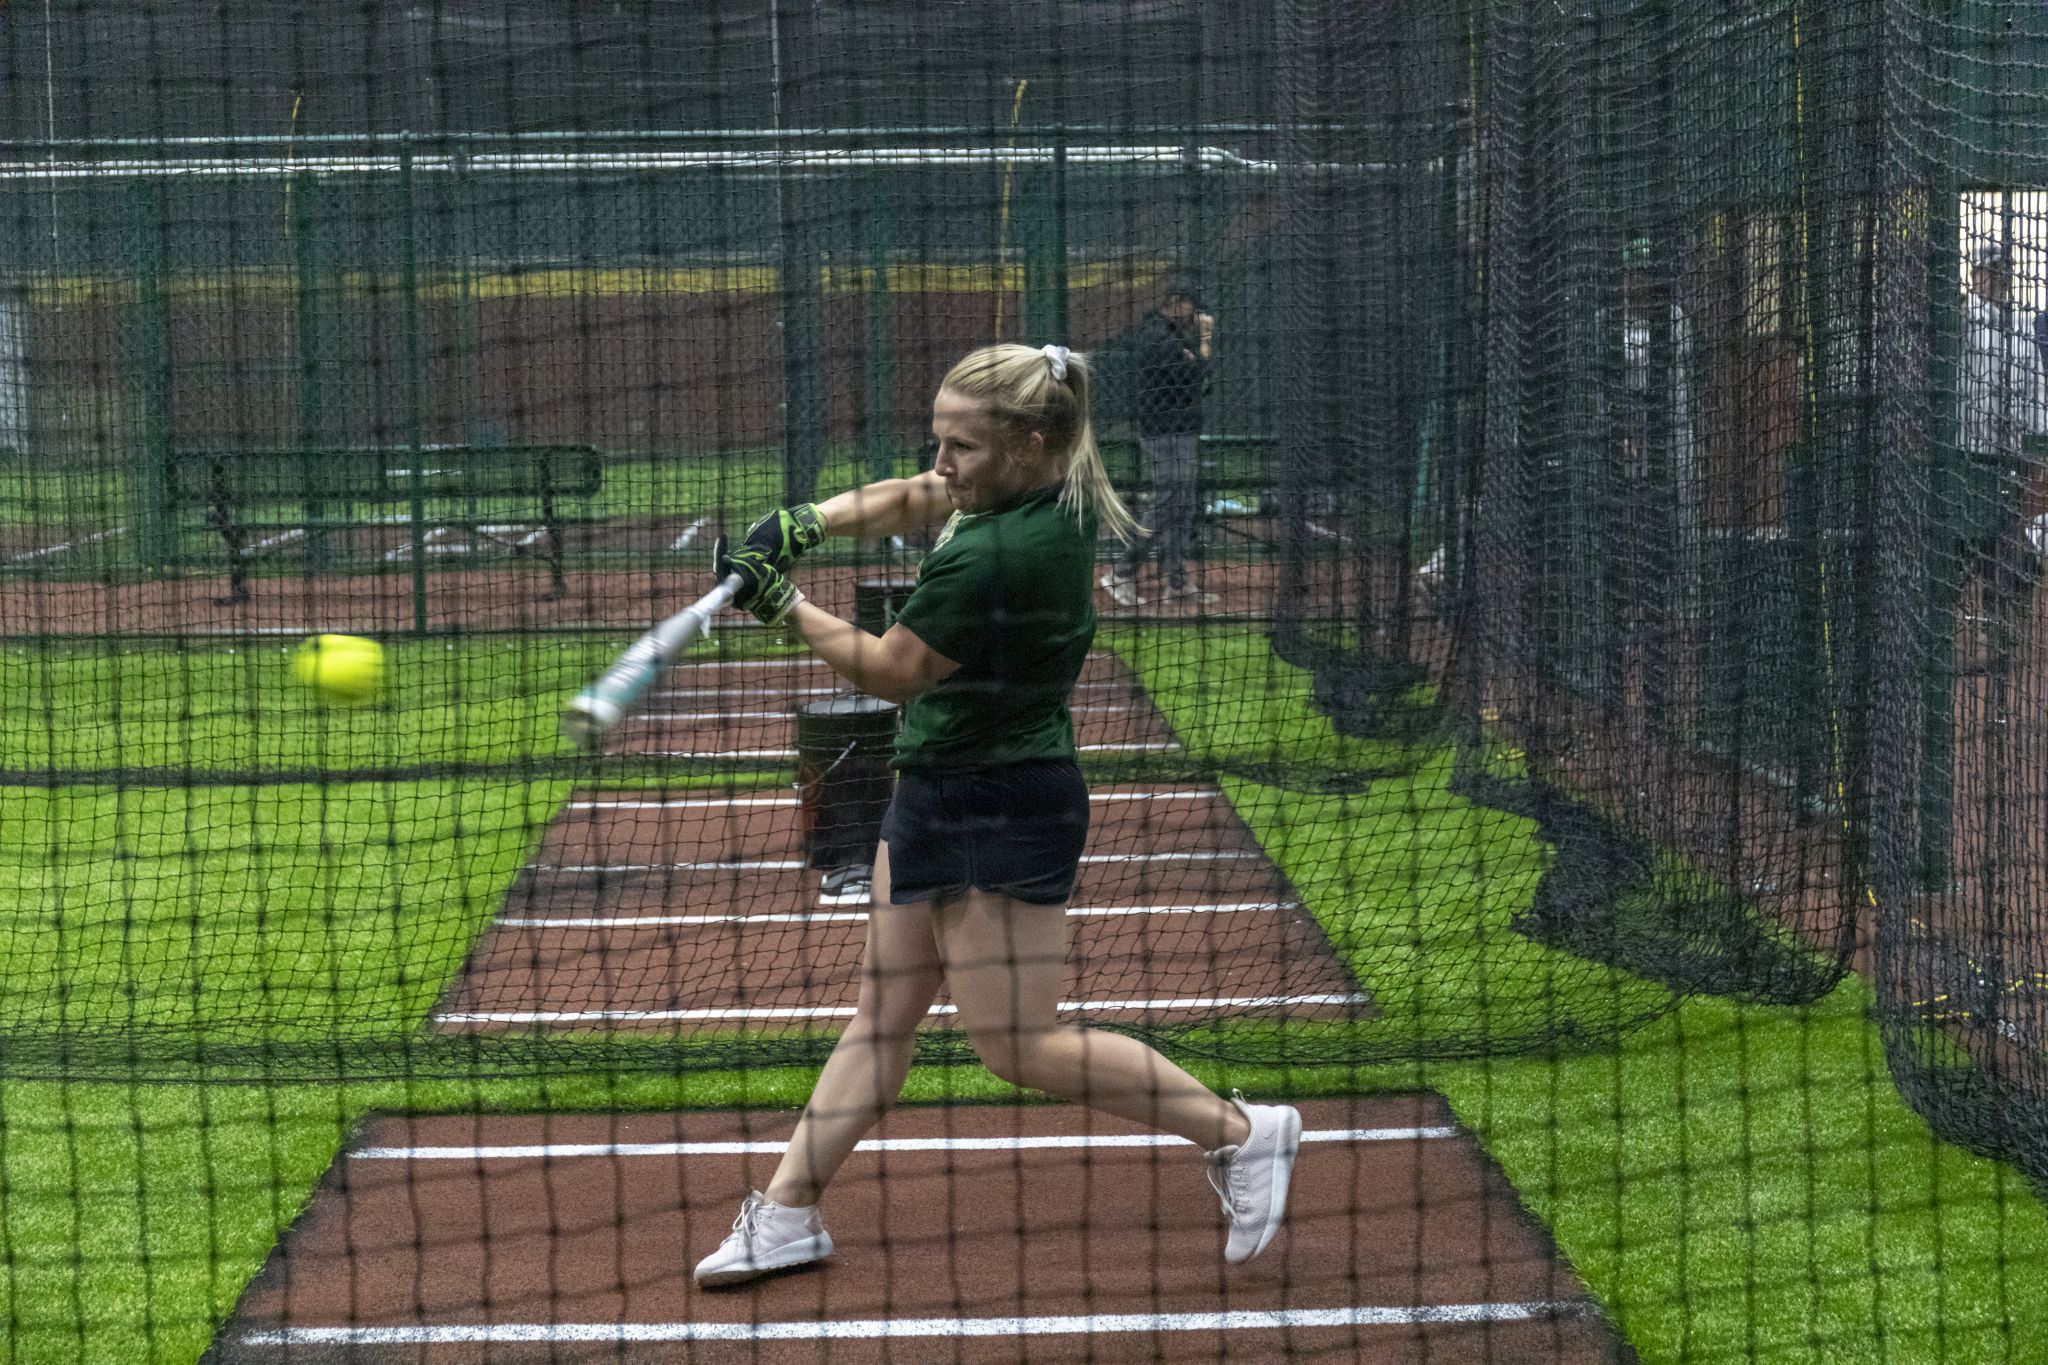 Training facility to open for baseball, softball players